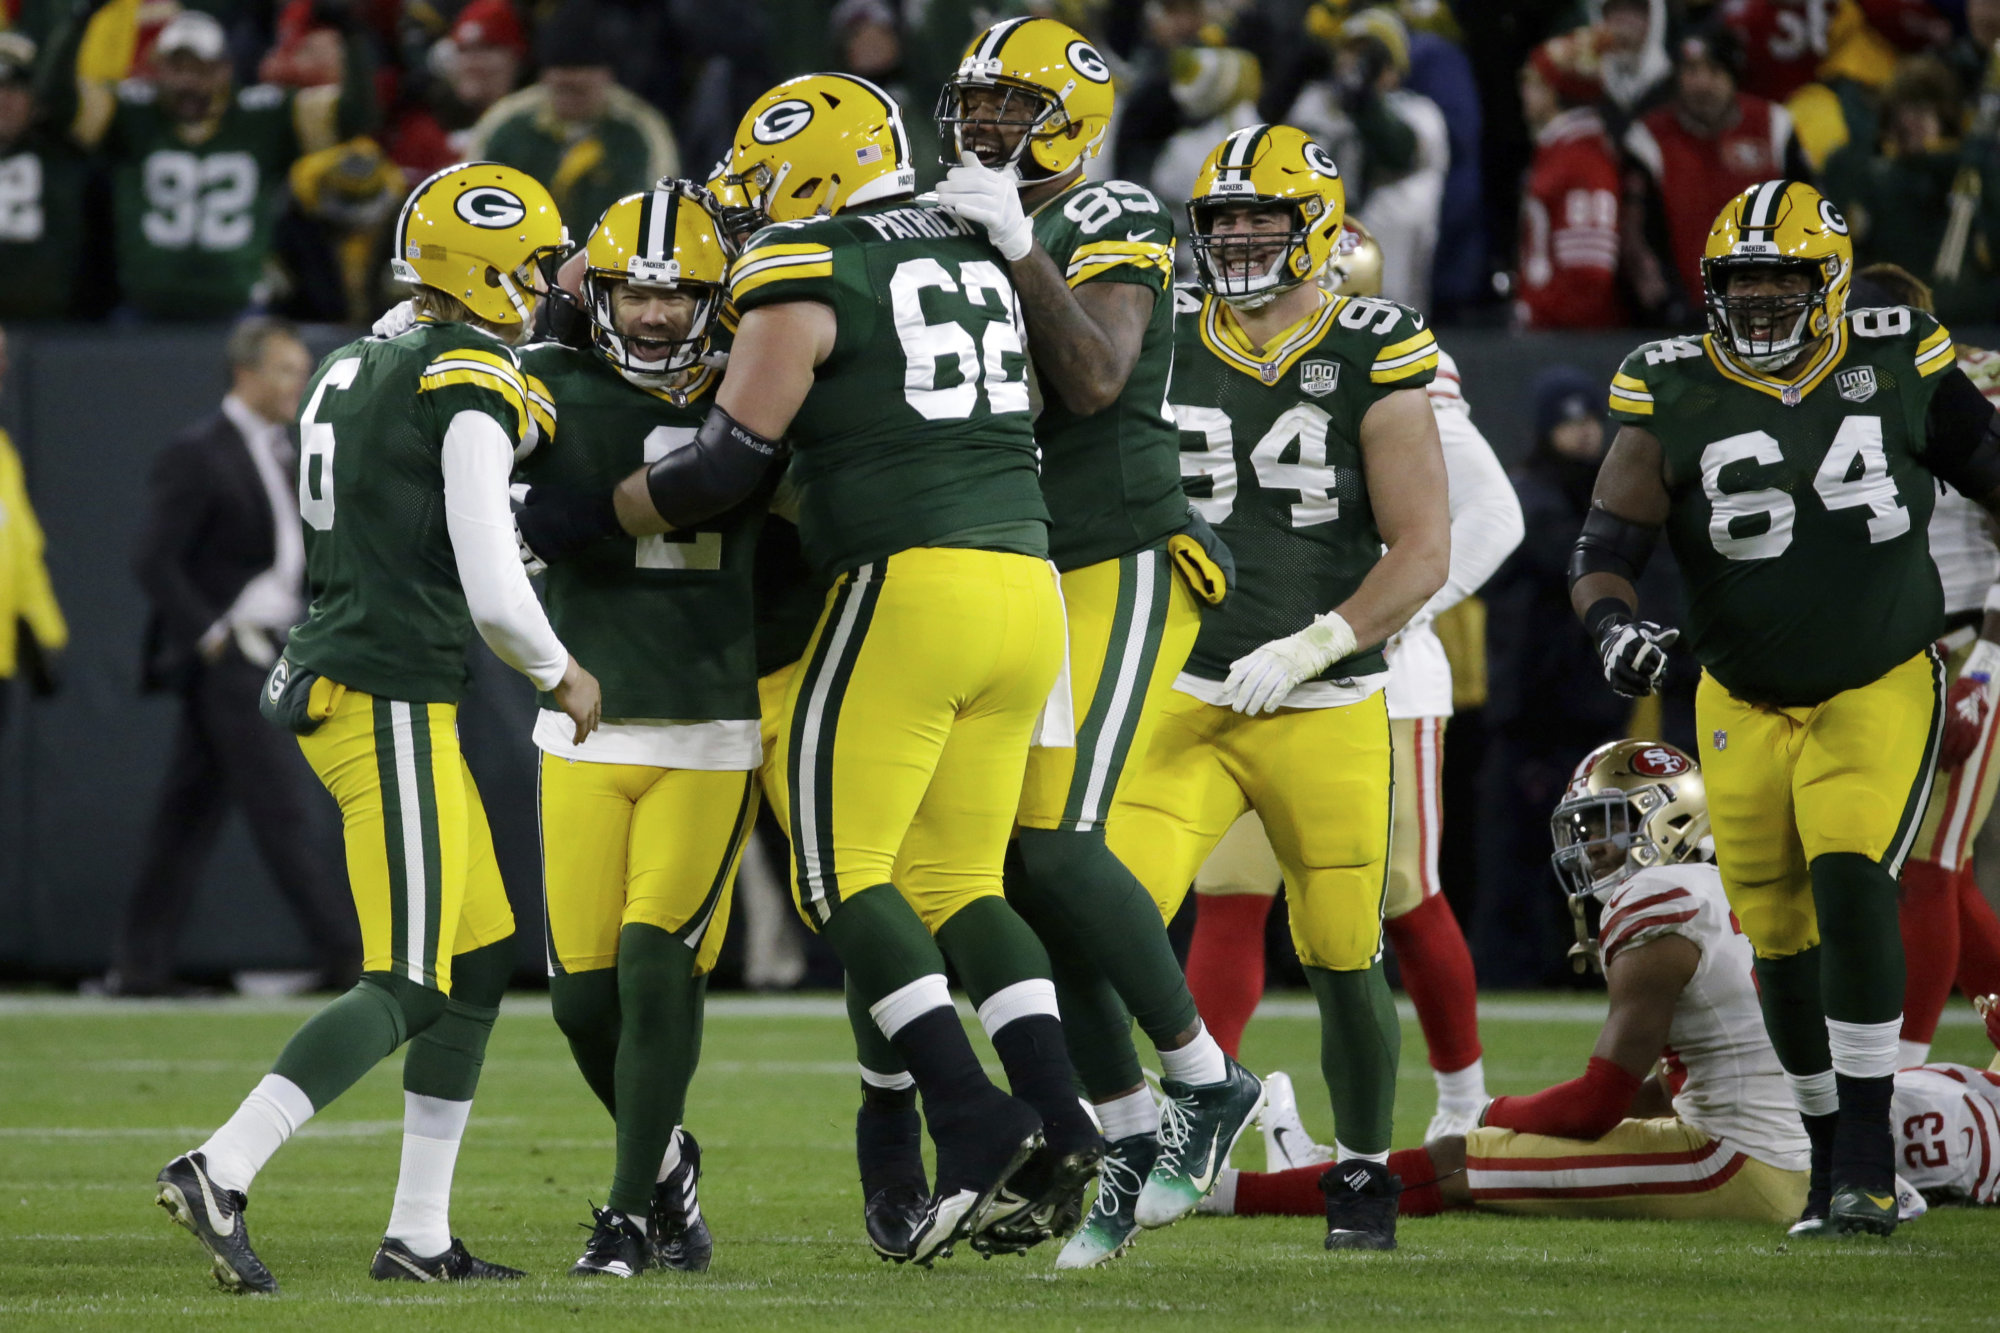 Green Bay Packers kicker Mason Crosby (2) celebrates with his teammates after kicking a game winning field goal during the second half of an NFL football game against the San Francisco 49ers Monday, Oct. 15, 2018, in Green Bay, Wis. The Packers won 33-30. (AP Photo/Mike Roemer)